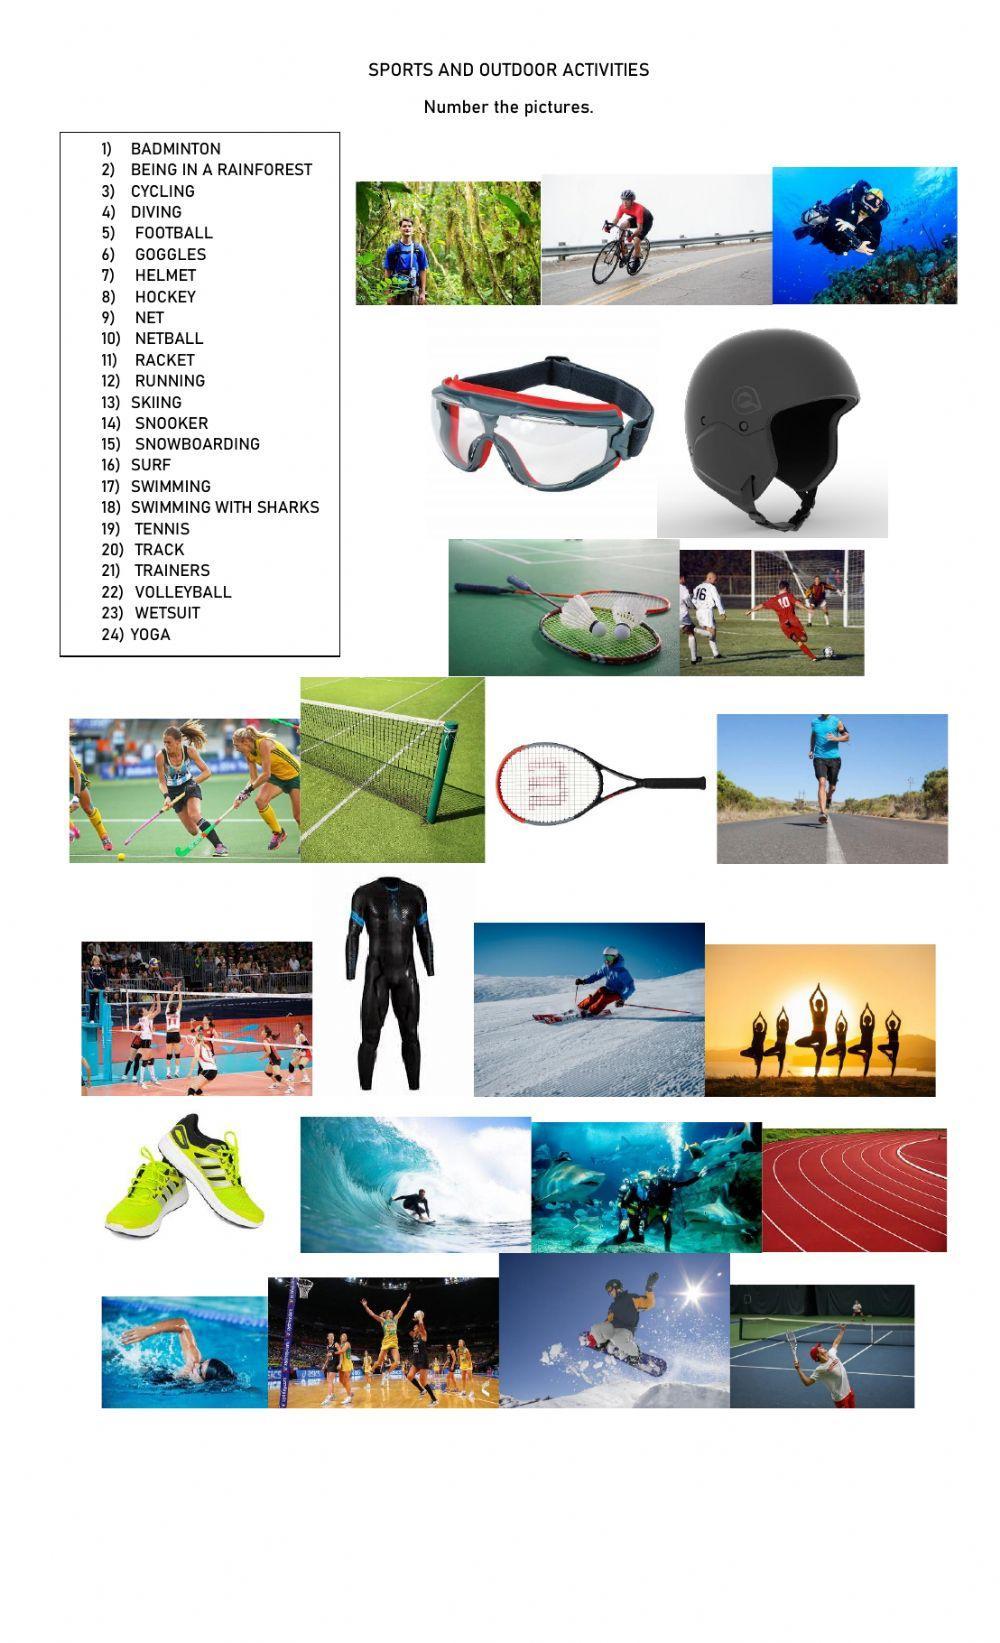 Sports and outdoor activities